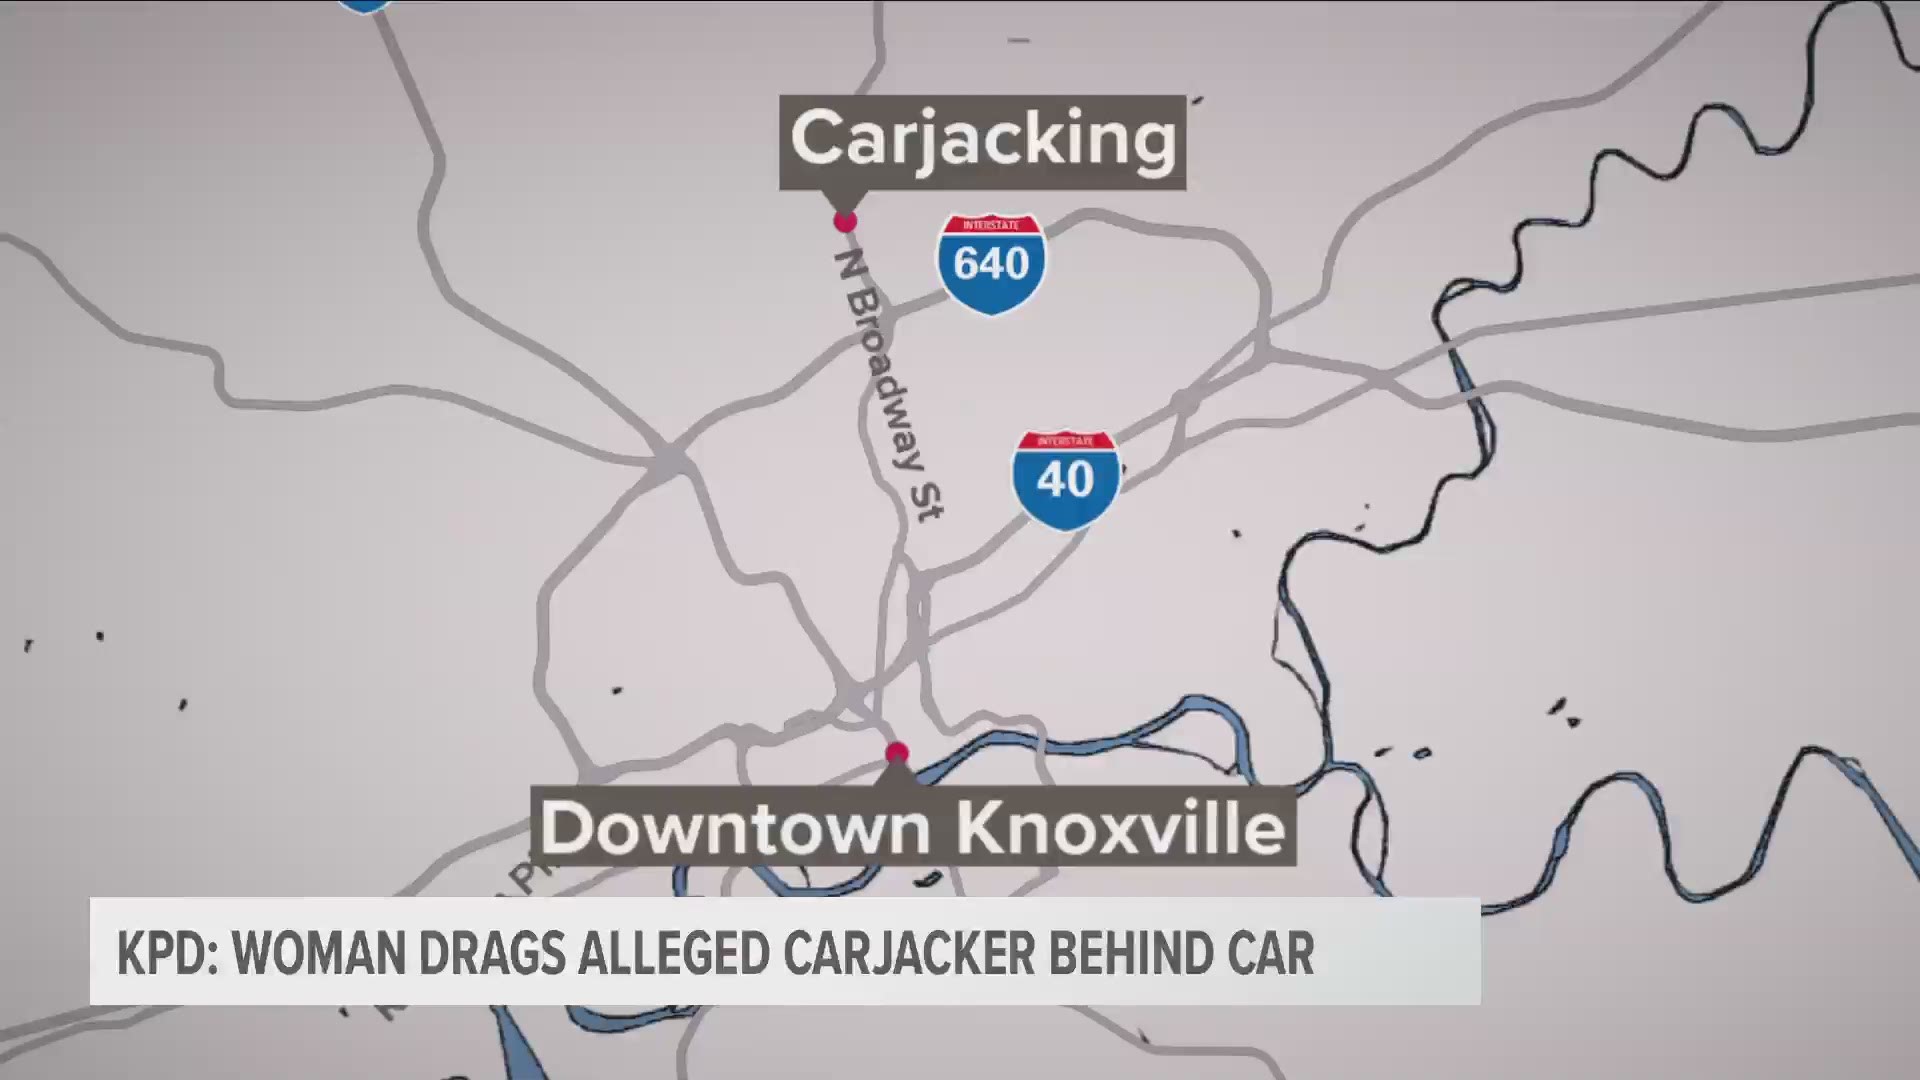 A preliminary hearing on the carjacking charge is set for July 3 at 9 a.m.